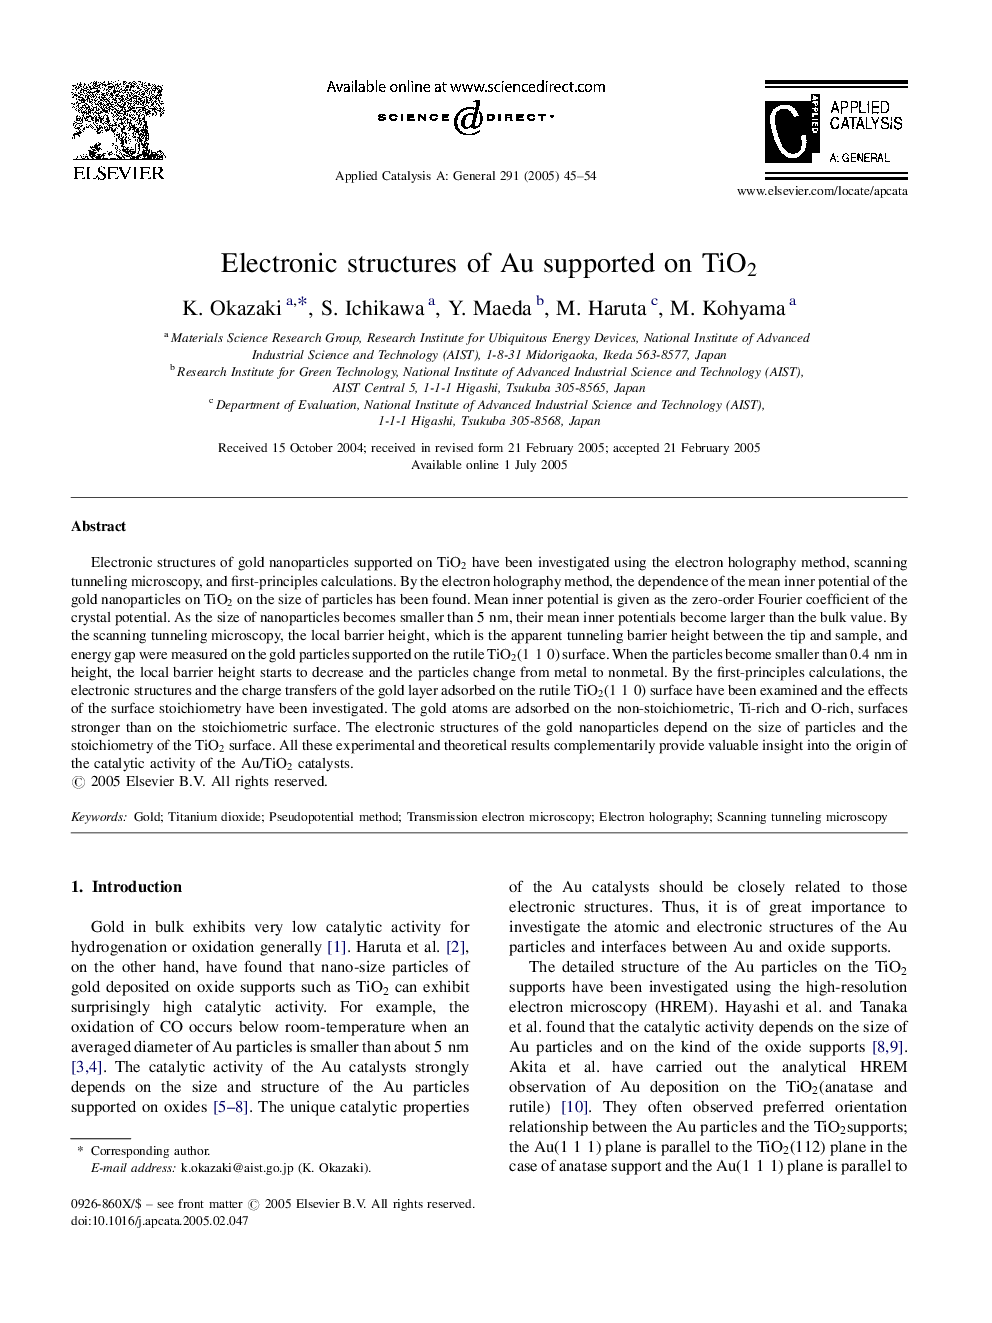 Electronic structures of Au supported on TiO2